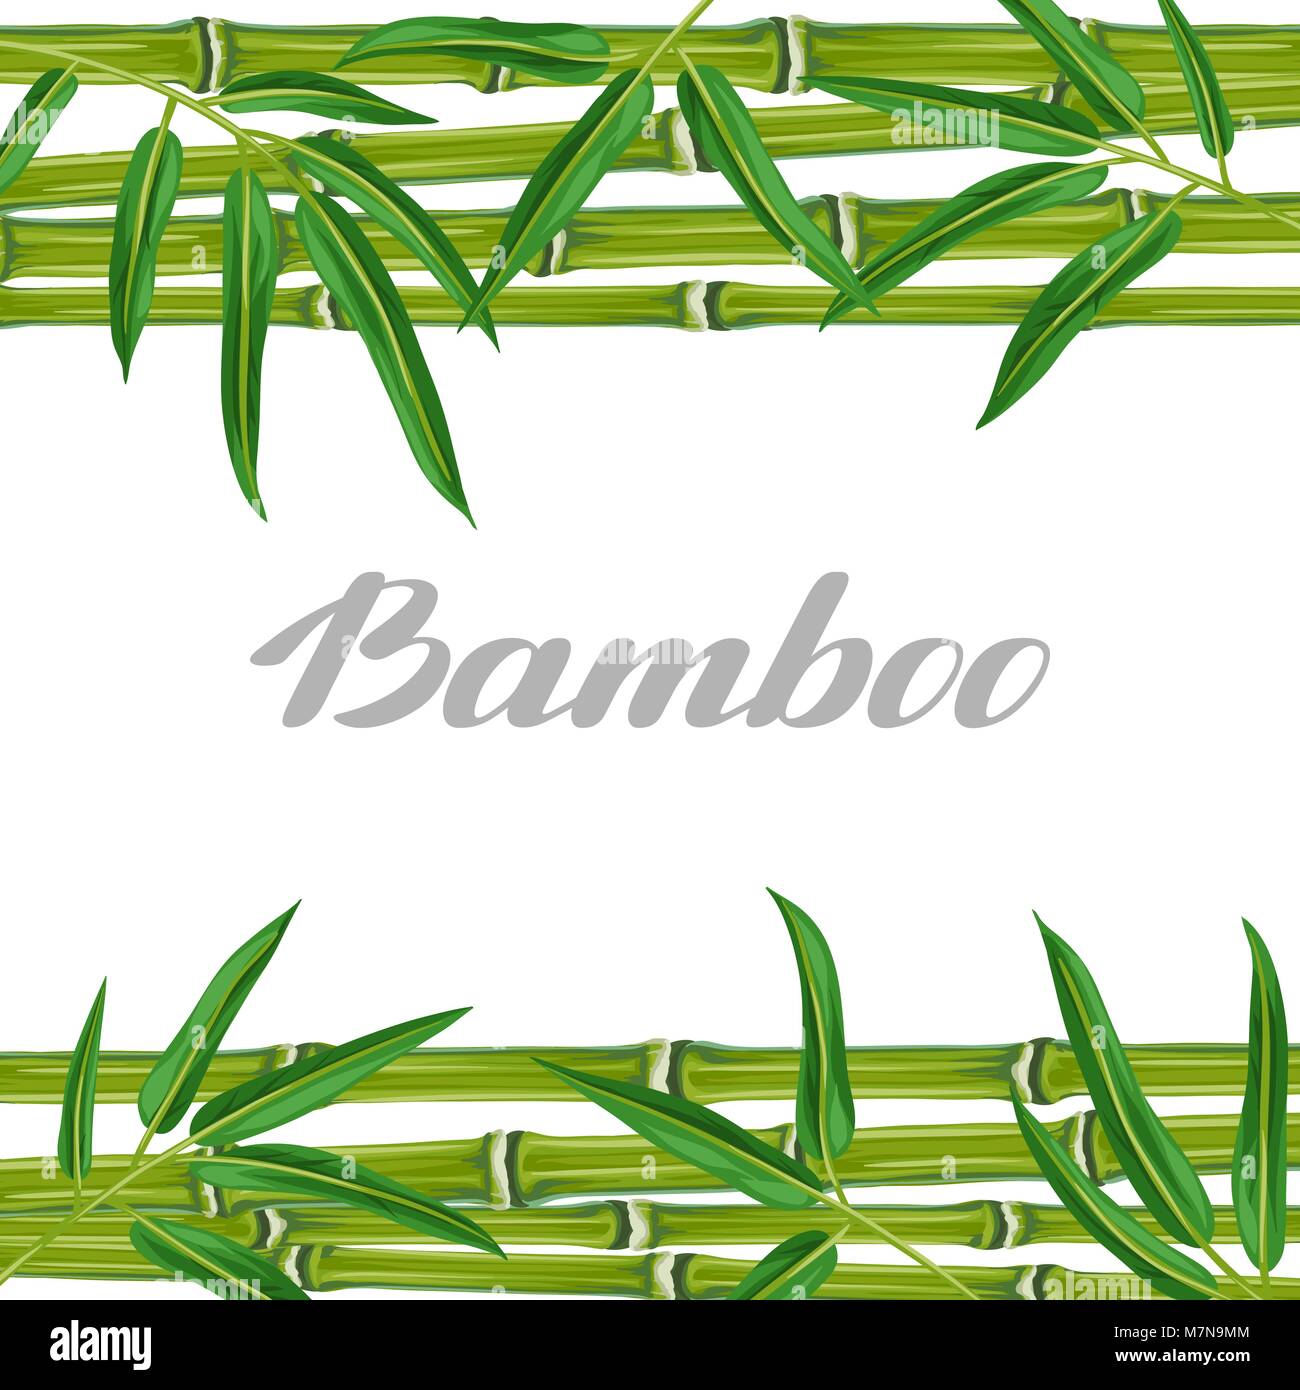 Background with bamboo plants and leaves. Image for holiday invitations, greeting cards, posters, advertising booklets, banners, flayers Stock Vector